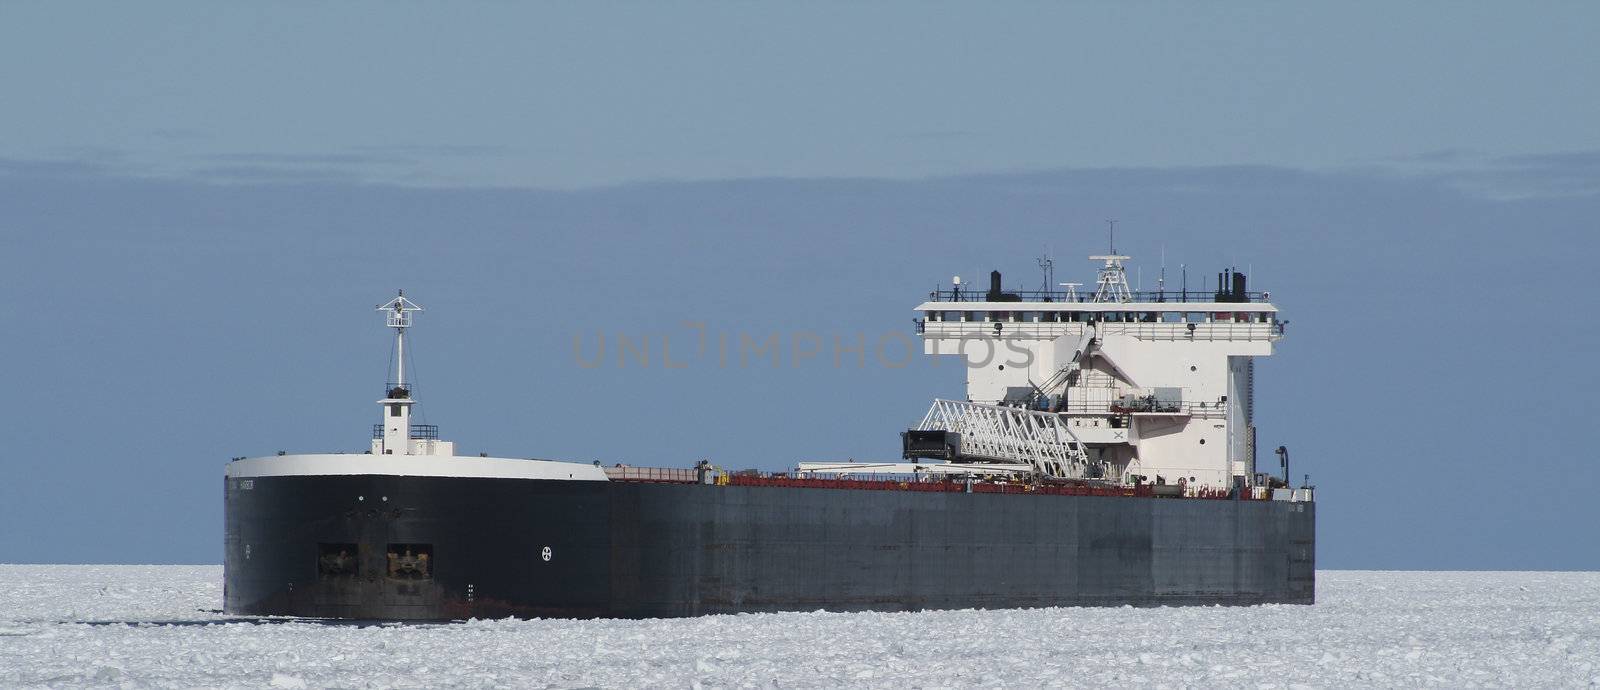 A Great Lakes Freighter underway in the ice